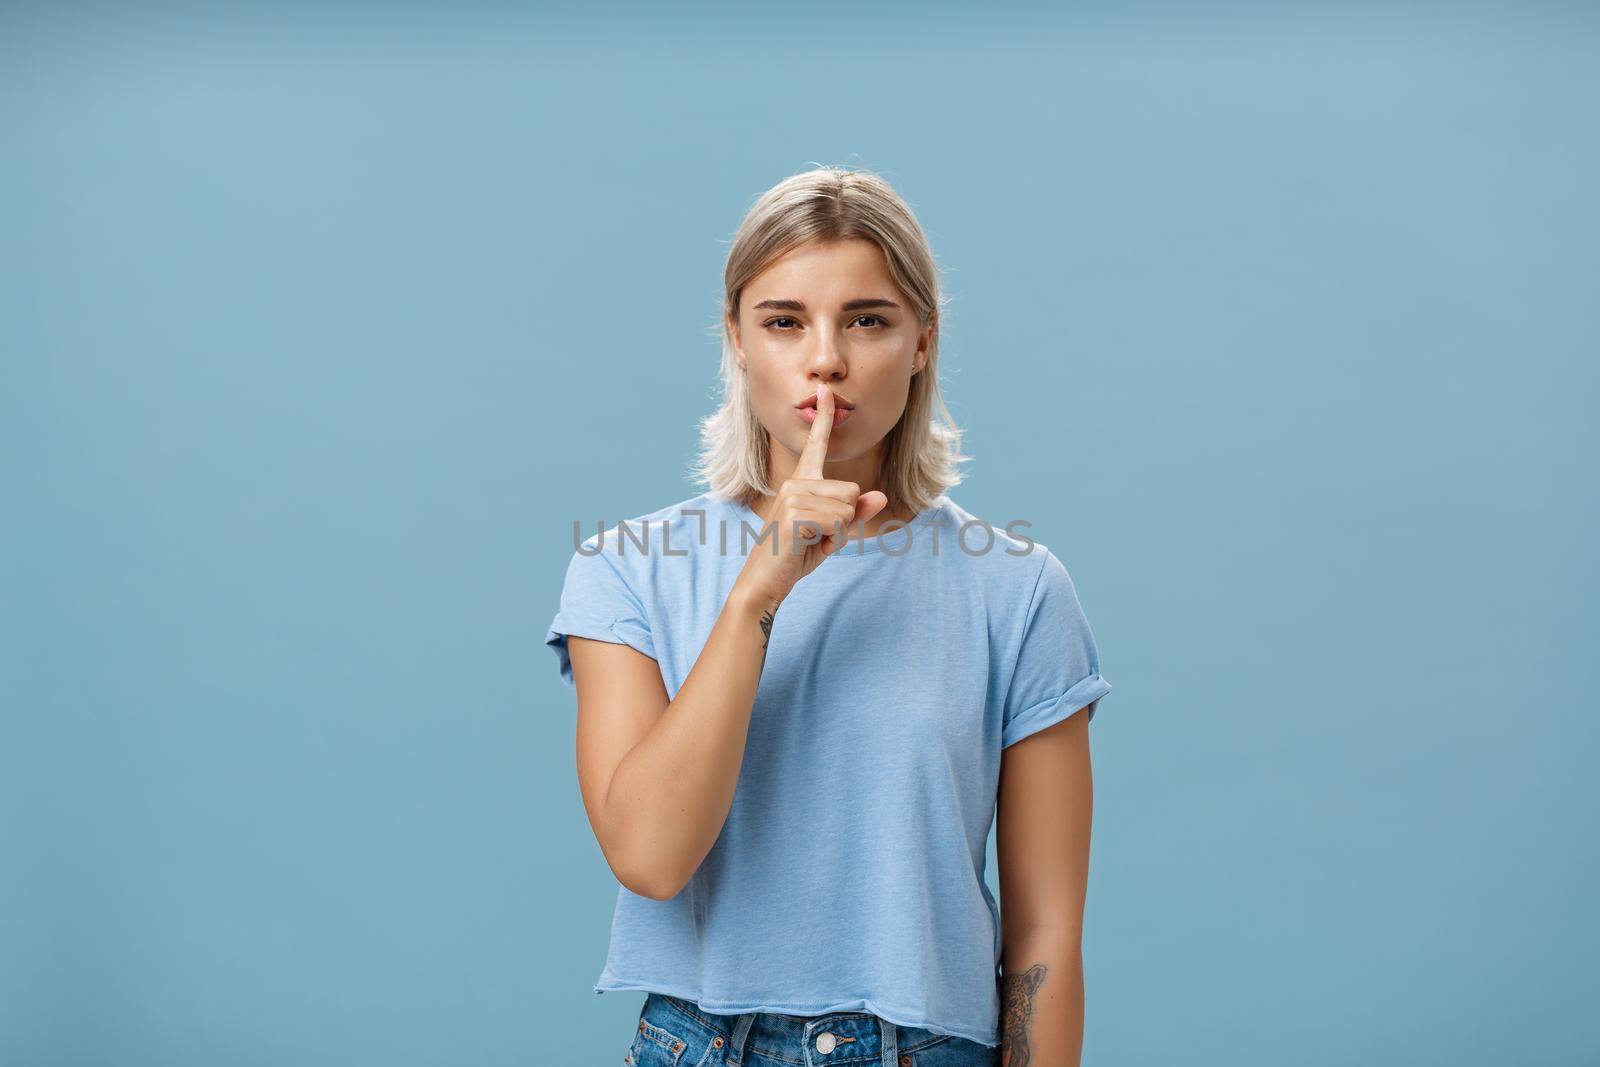 Promise not tell anyone it secret. Mysterious attractive and feminine blond woman with tanned skin and tattoos shushing with index finger over mouth squinting as if hiding something over blue wall.